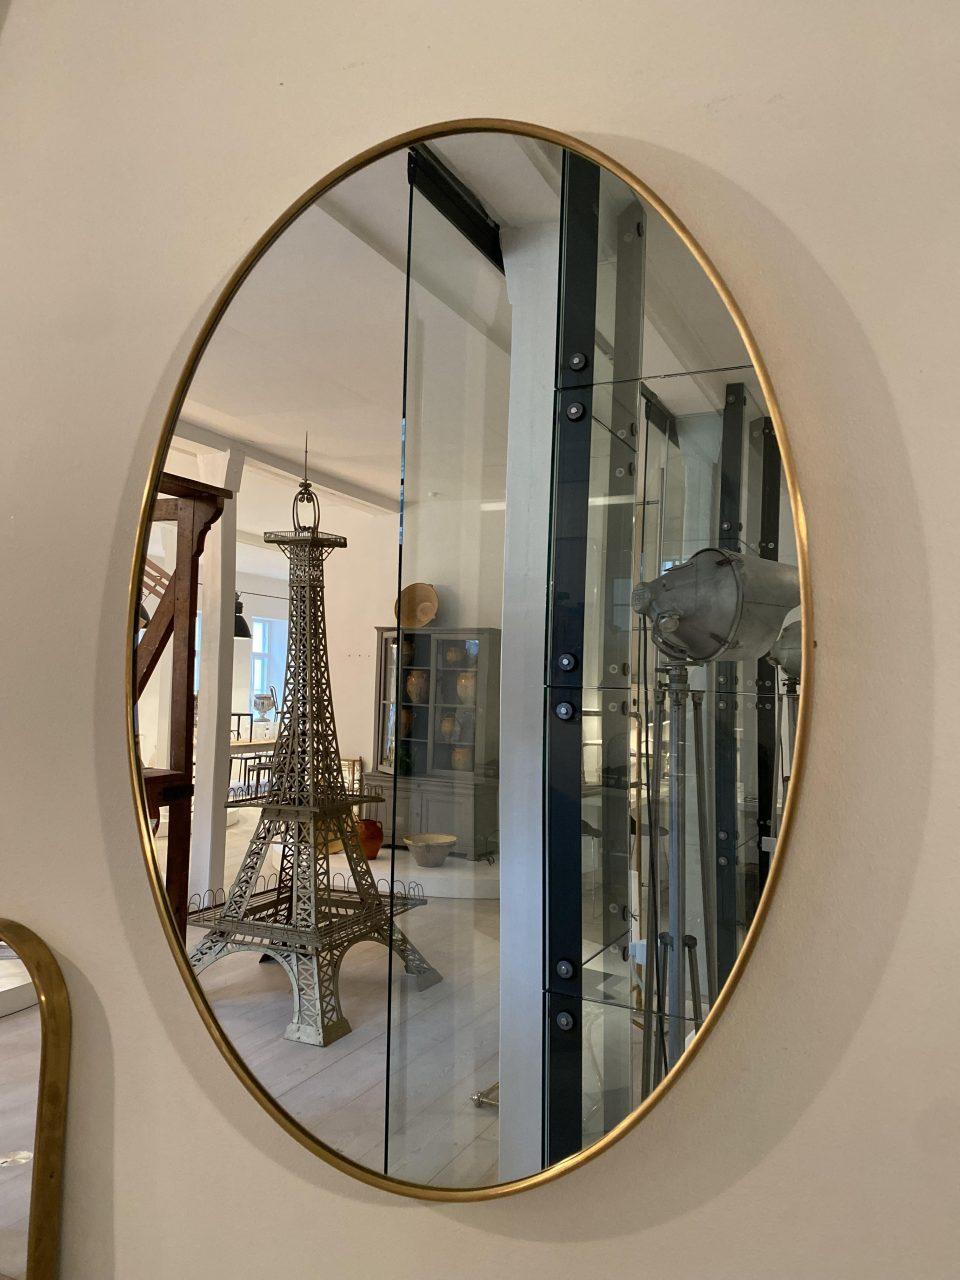 Lovely elliptical midcentury brass mirror from circa 1960s Italy. It has a sleek and tight quality brass frame with a rounded profile.

Original mirrored glass, and stylistically related to the designer Giò Ponti.

Ideal mirror for the entrance